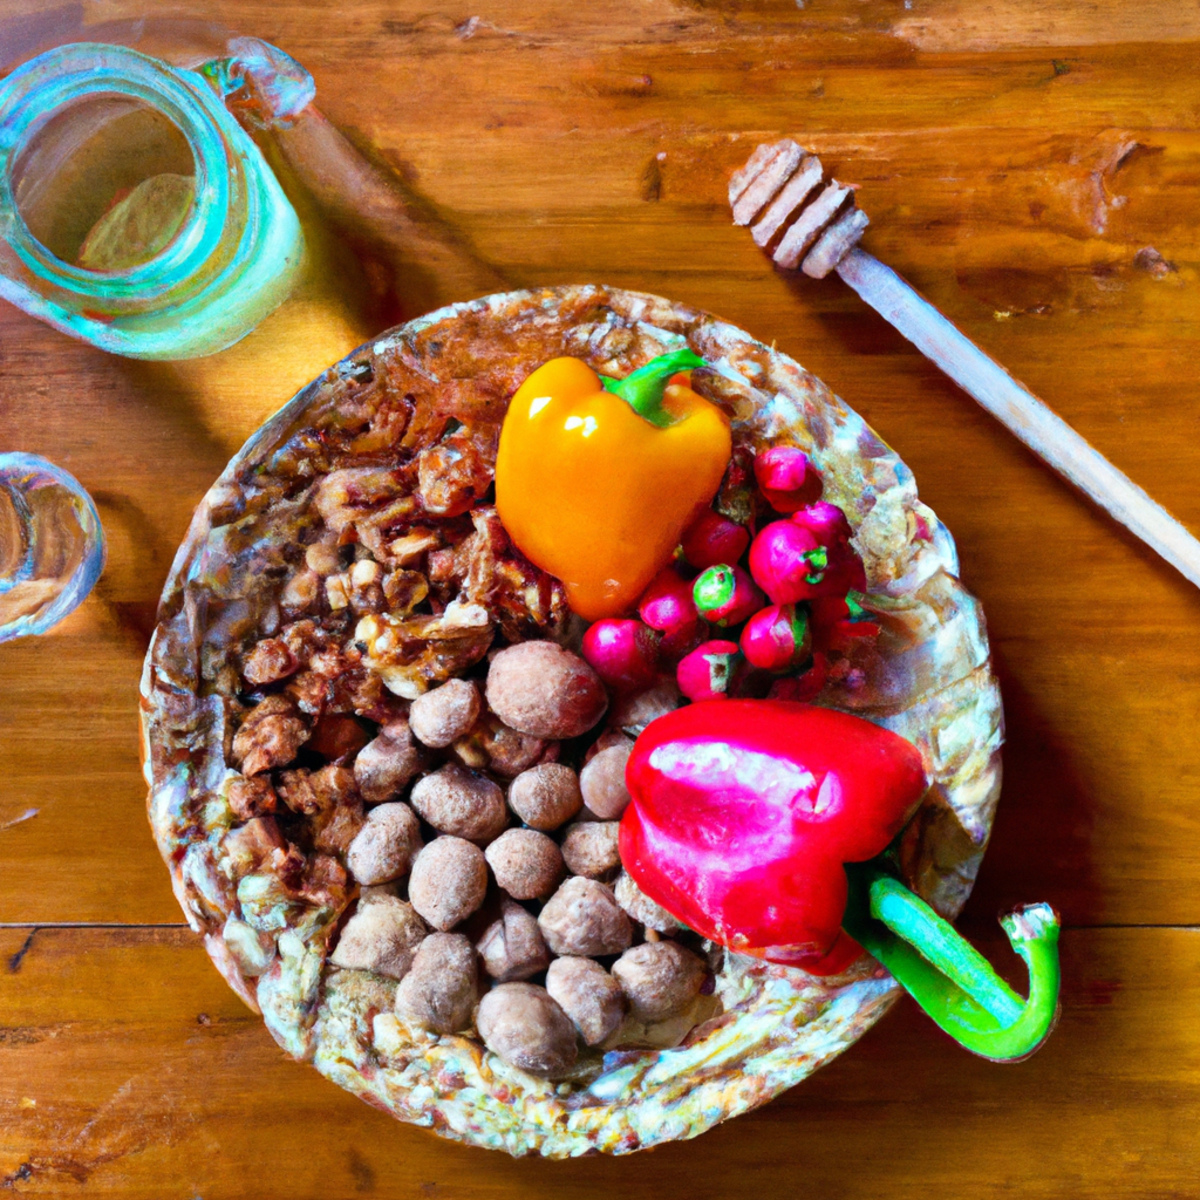 Natural Stress Relief - A balanced and healthy diet with colorful fruits and veggies, nuts, and honey on a wooden table.